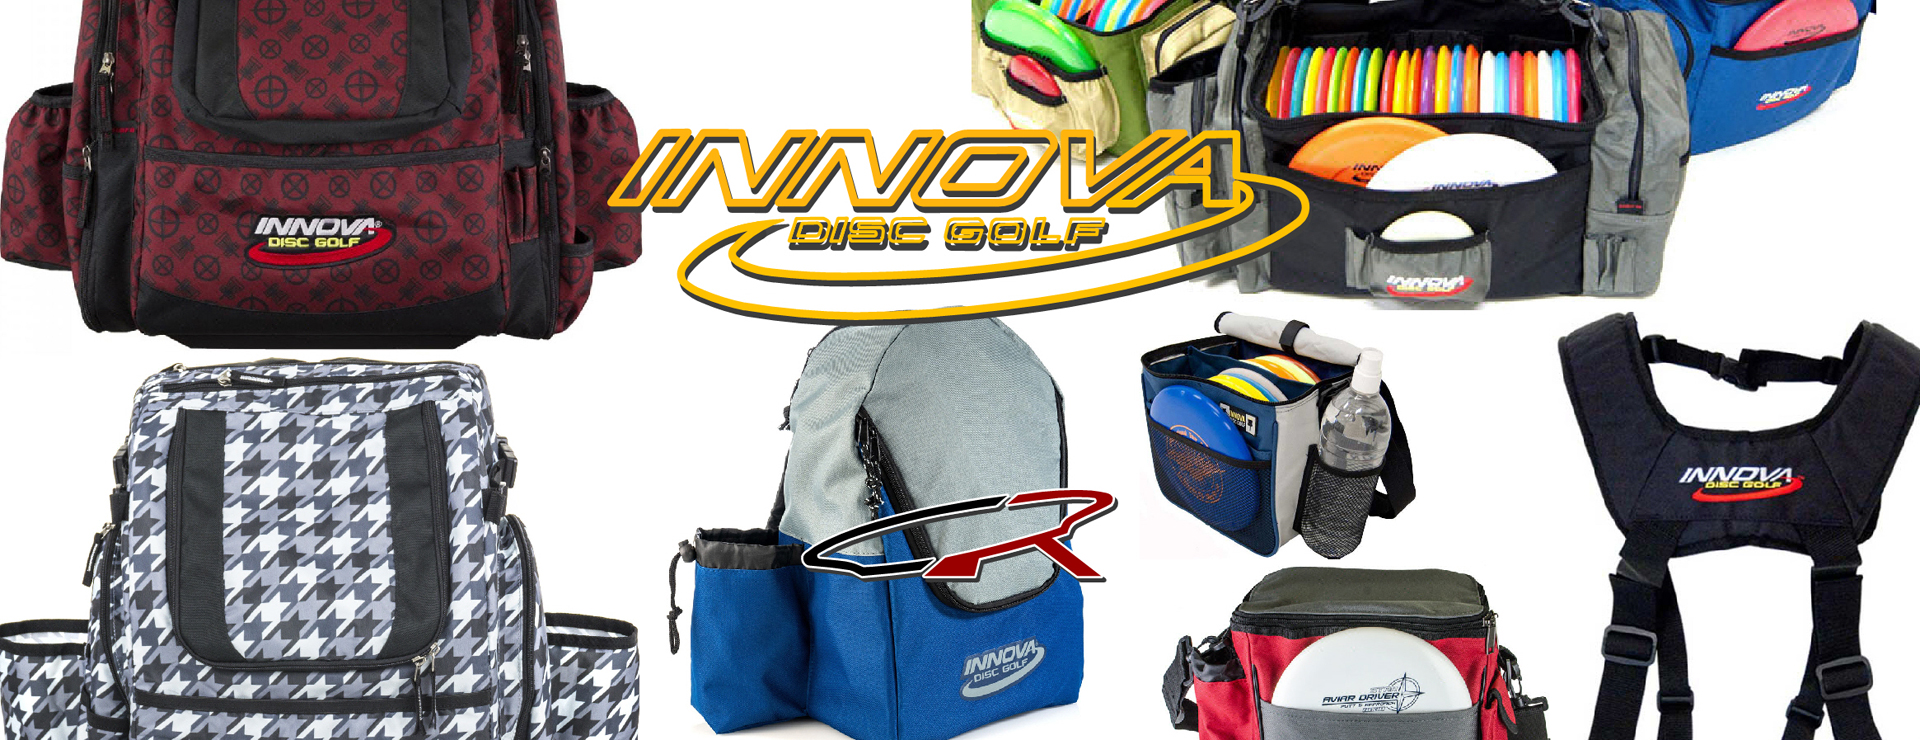 Chain Reaction stocks the entire line of Innova Disc Golf Bags